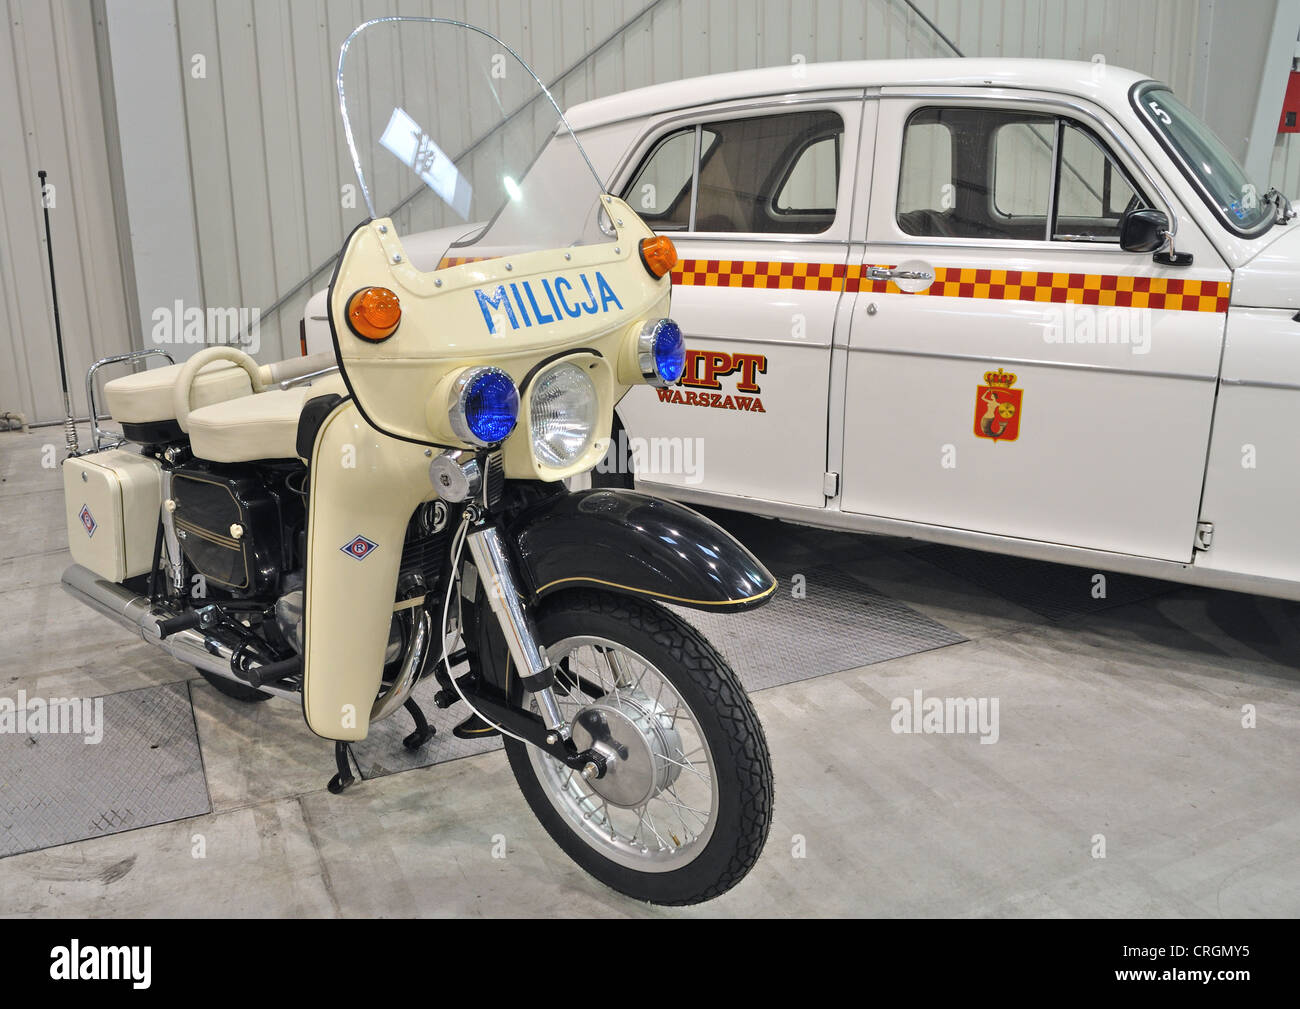 Motorcycle civic militia and taxi car. Stock Photo